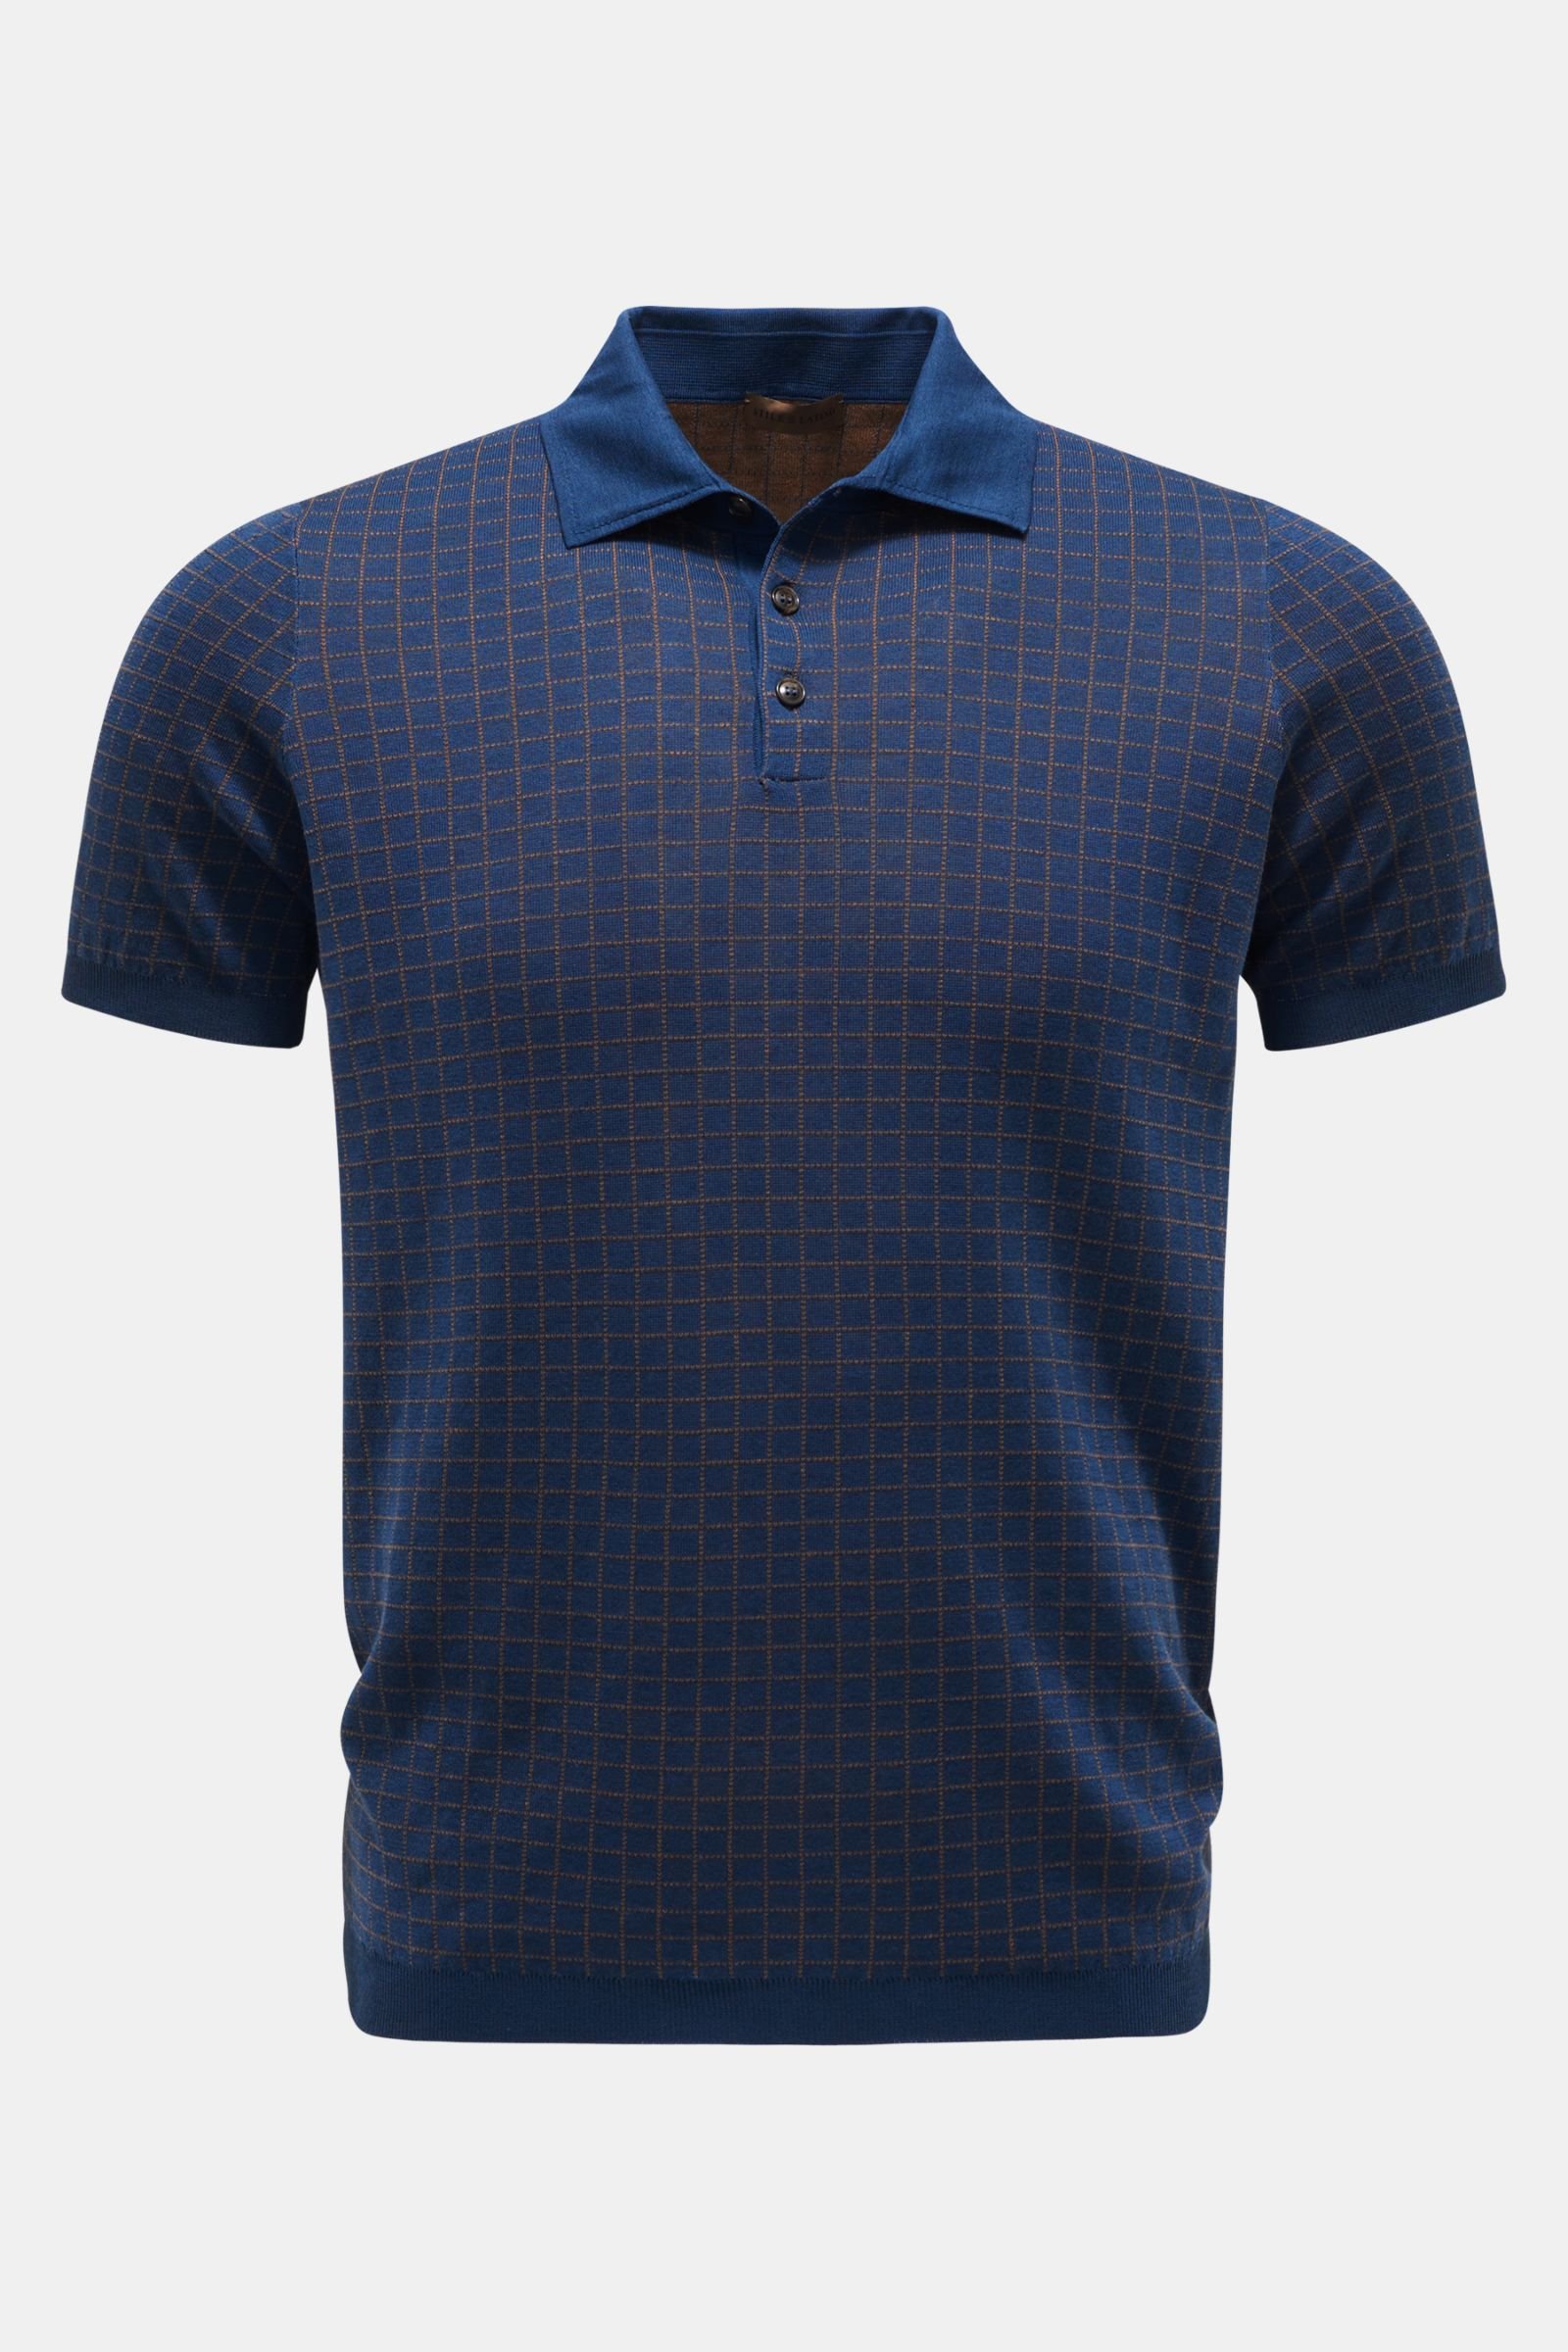 Short sleeve knit polo dark blue/brown checked